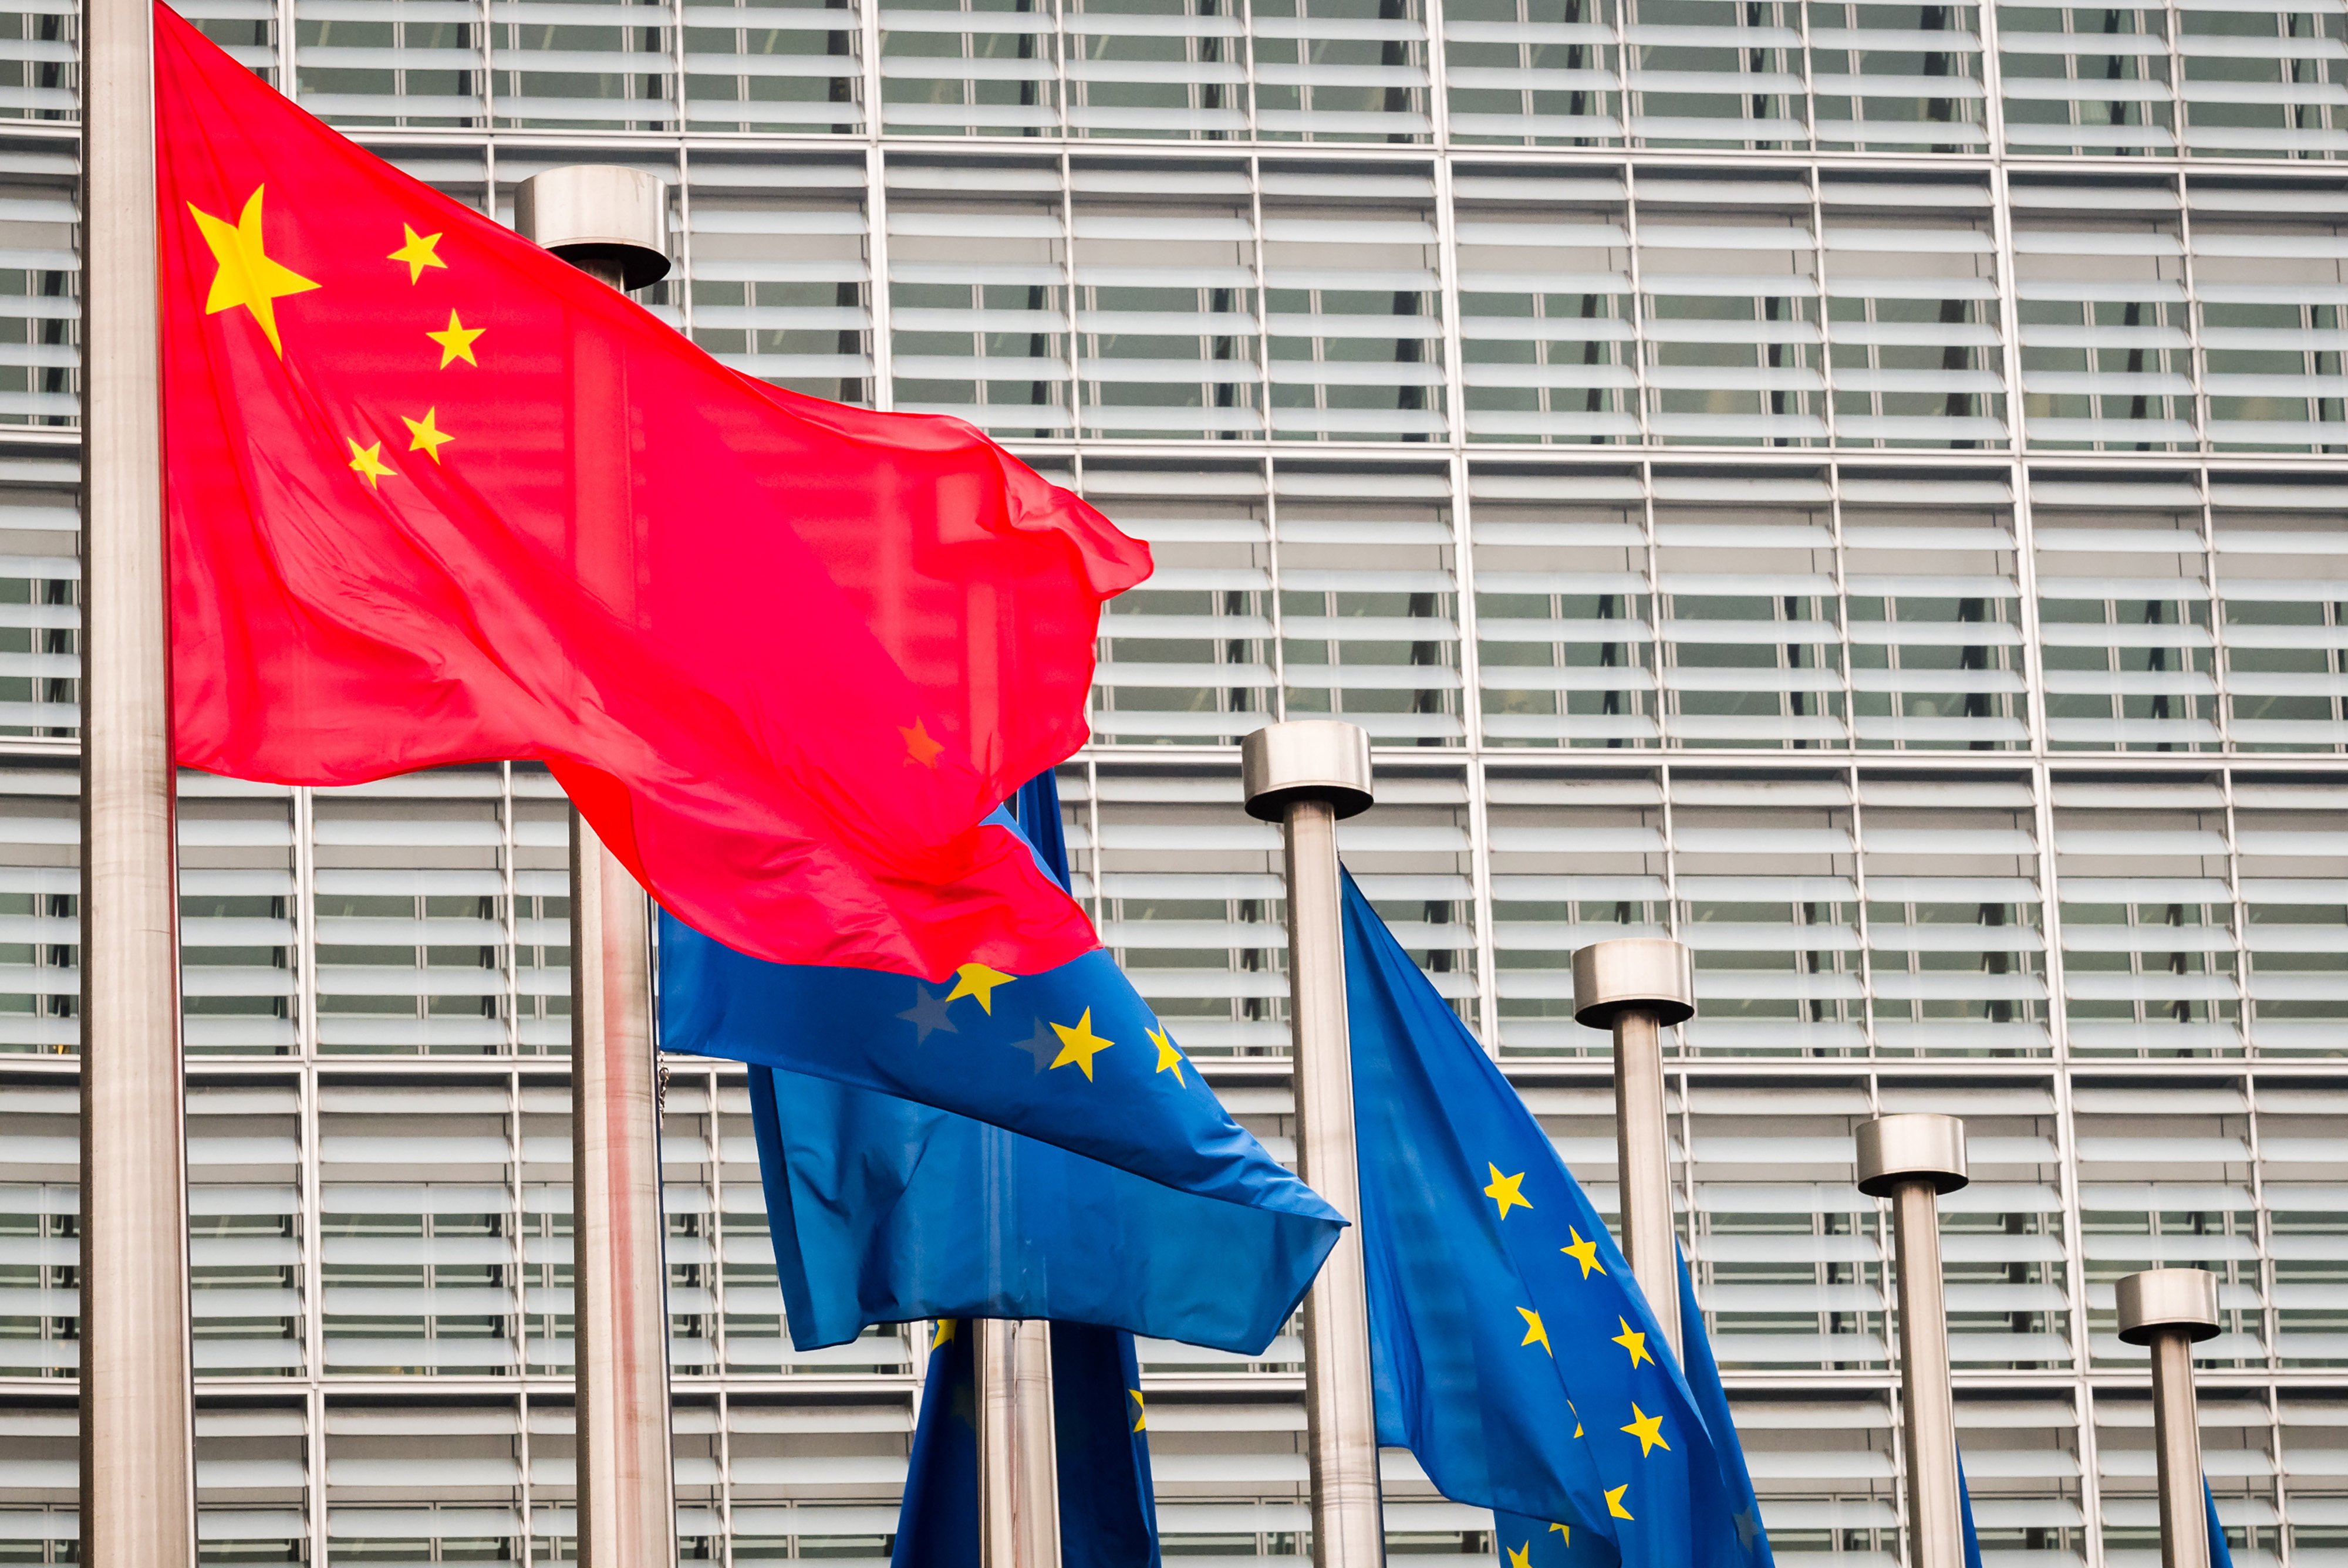 EU firms have expressed worries over the scope of China’s regulations on data security. Photo: Bloomberg